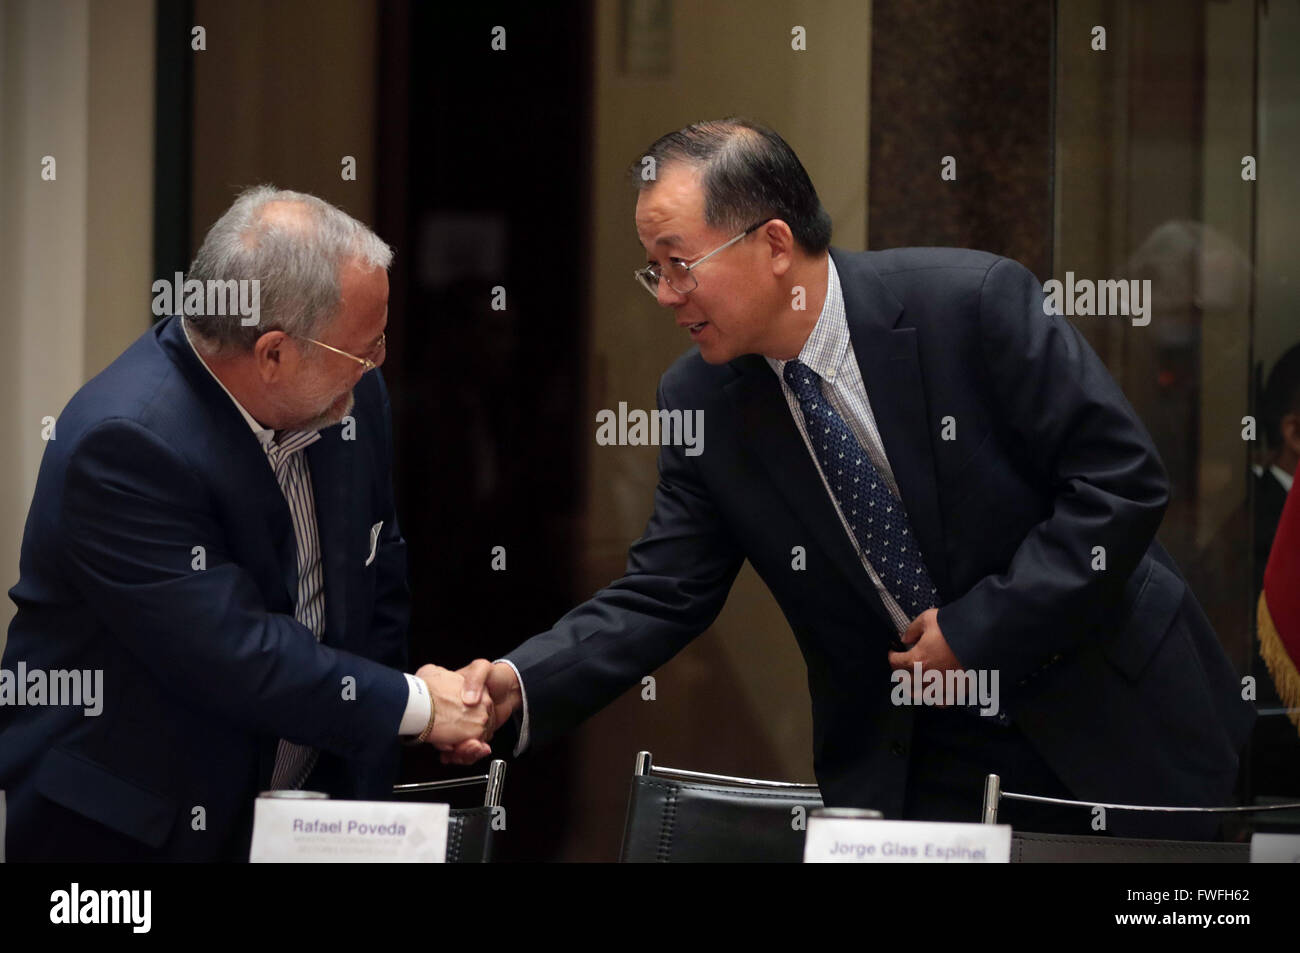 (160405) -- QUITO, April 5, 2016 (Xinhua) -- Chen Weilong (R), representative of China's Sinopec International and a member of Penaturi Consortium, shakes hands with Jose Icaza, manager of Petroamazonas of Ecuador, after the signing of a service contract in the Protocolar Hall of Ecuador's Vicepresidency, in Quito, capital of Ecuador, on April 4, 2016. Ecuador's government-owned Petroamazonas signed nine service contracts on Monday with international consortiums in efforts to develop its mature oil fields. Panaturi Consortium, made up of China's Sinopec International and Sinopec Service Ecuado Stock Photo